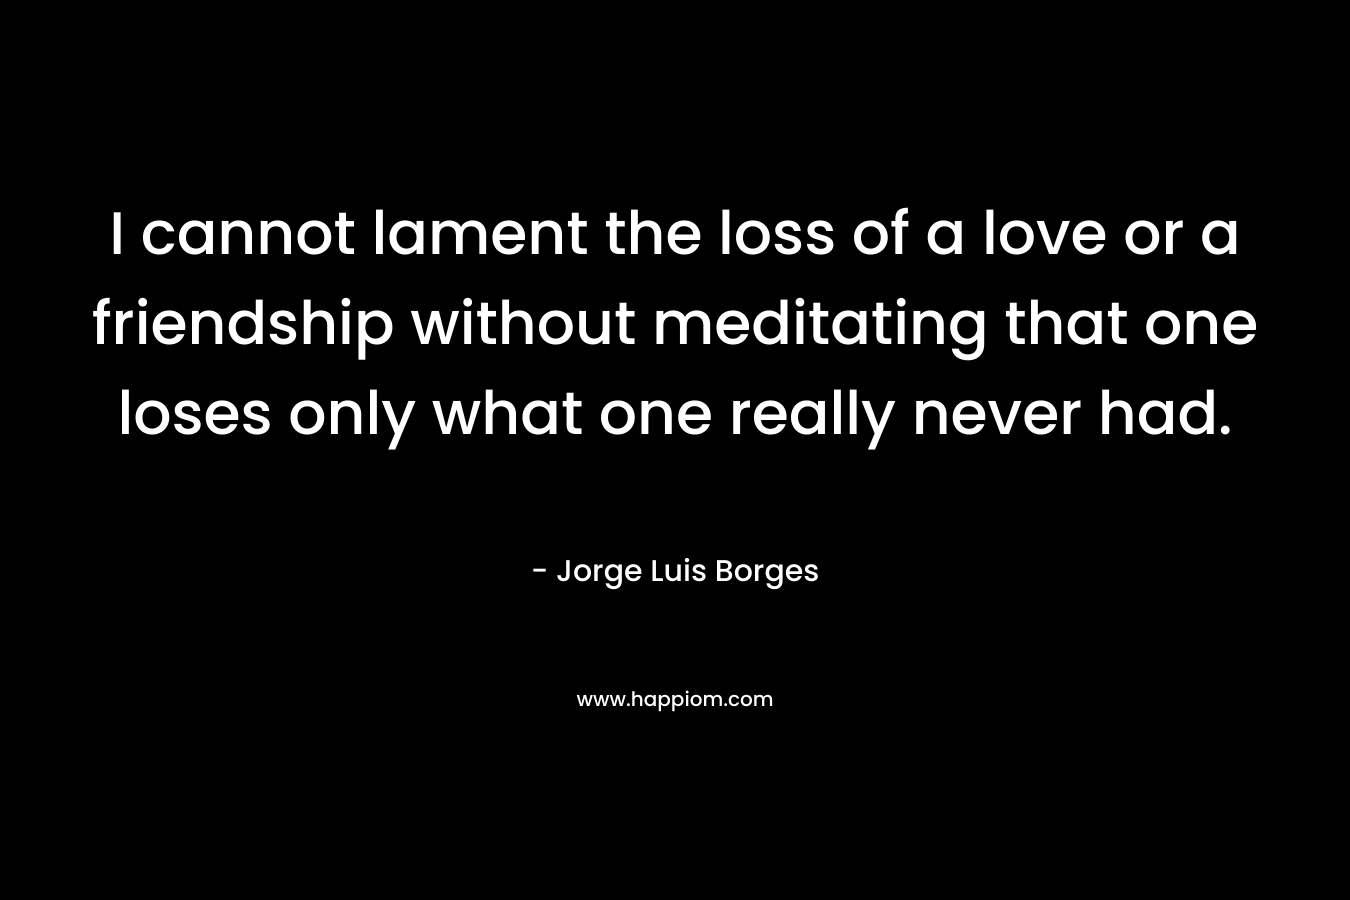 I cannot lament the loss of a love or a friendship without meditating that one loses only what one really never had. – Jorge Luis Borges